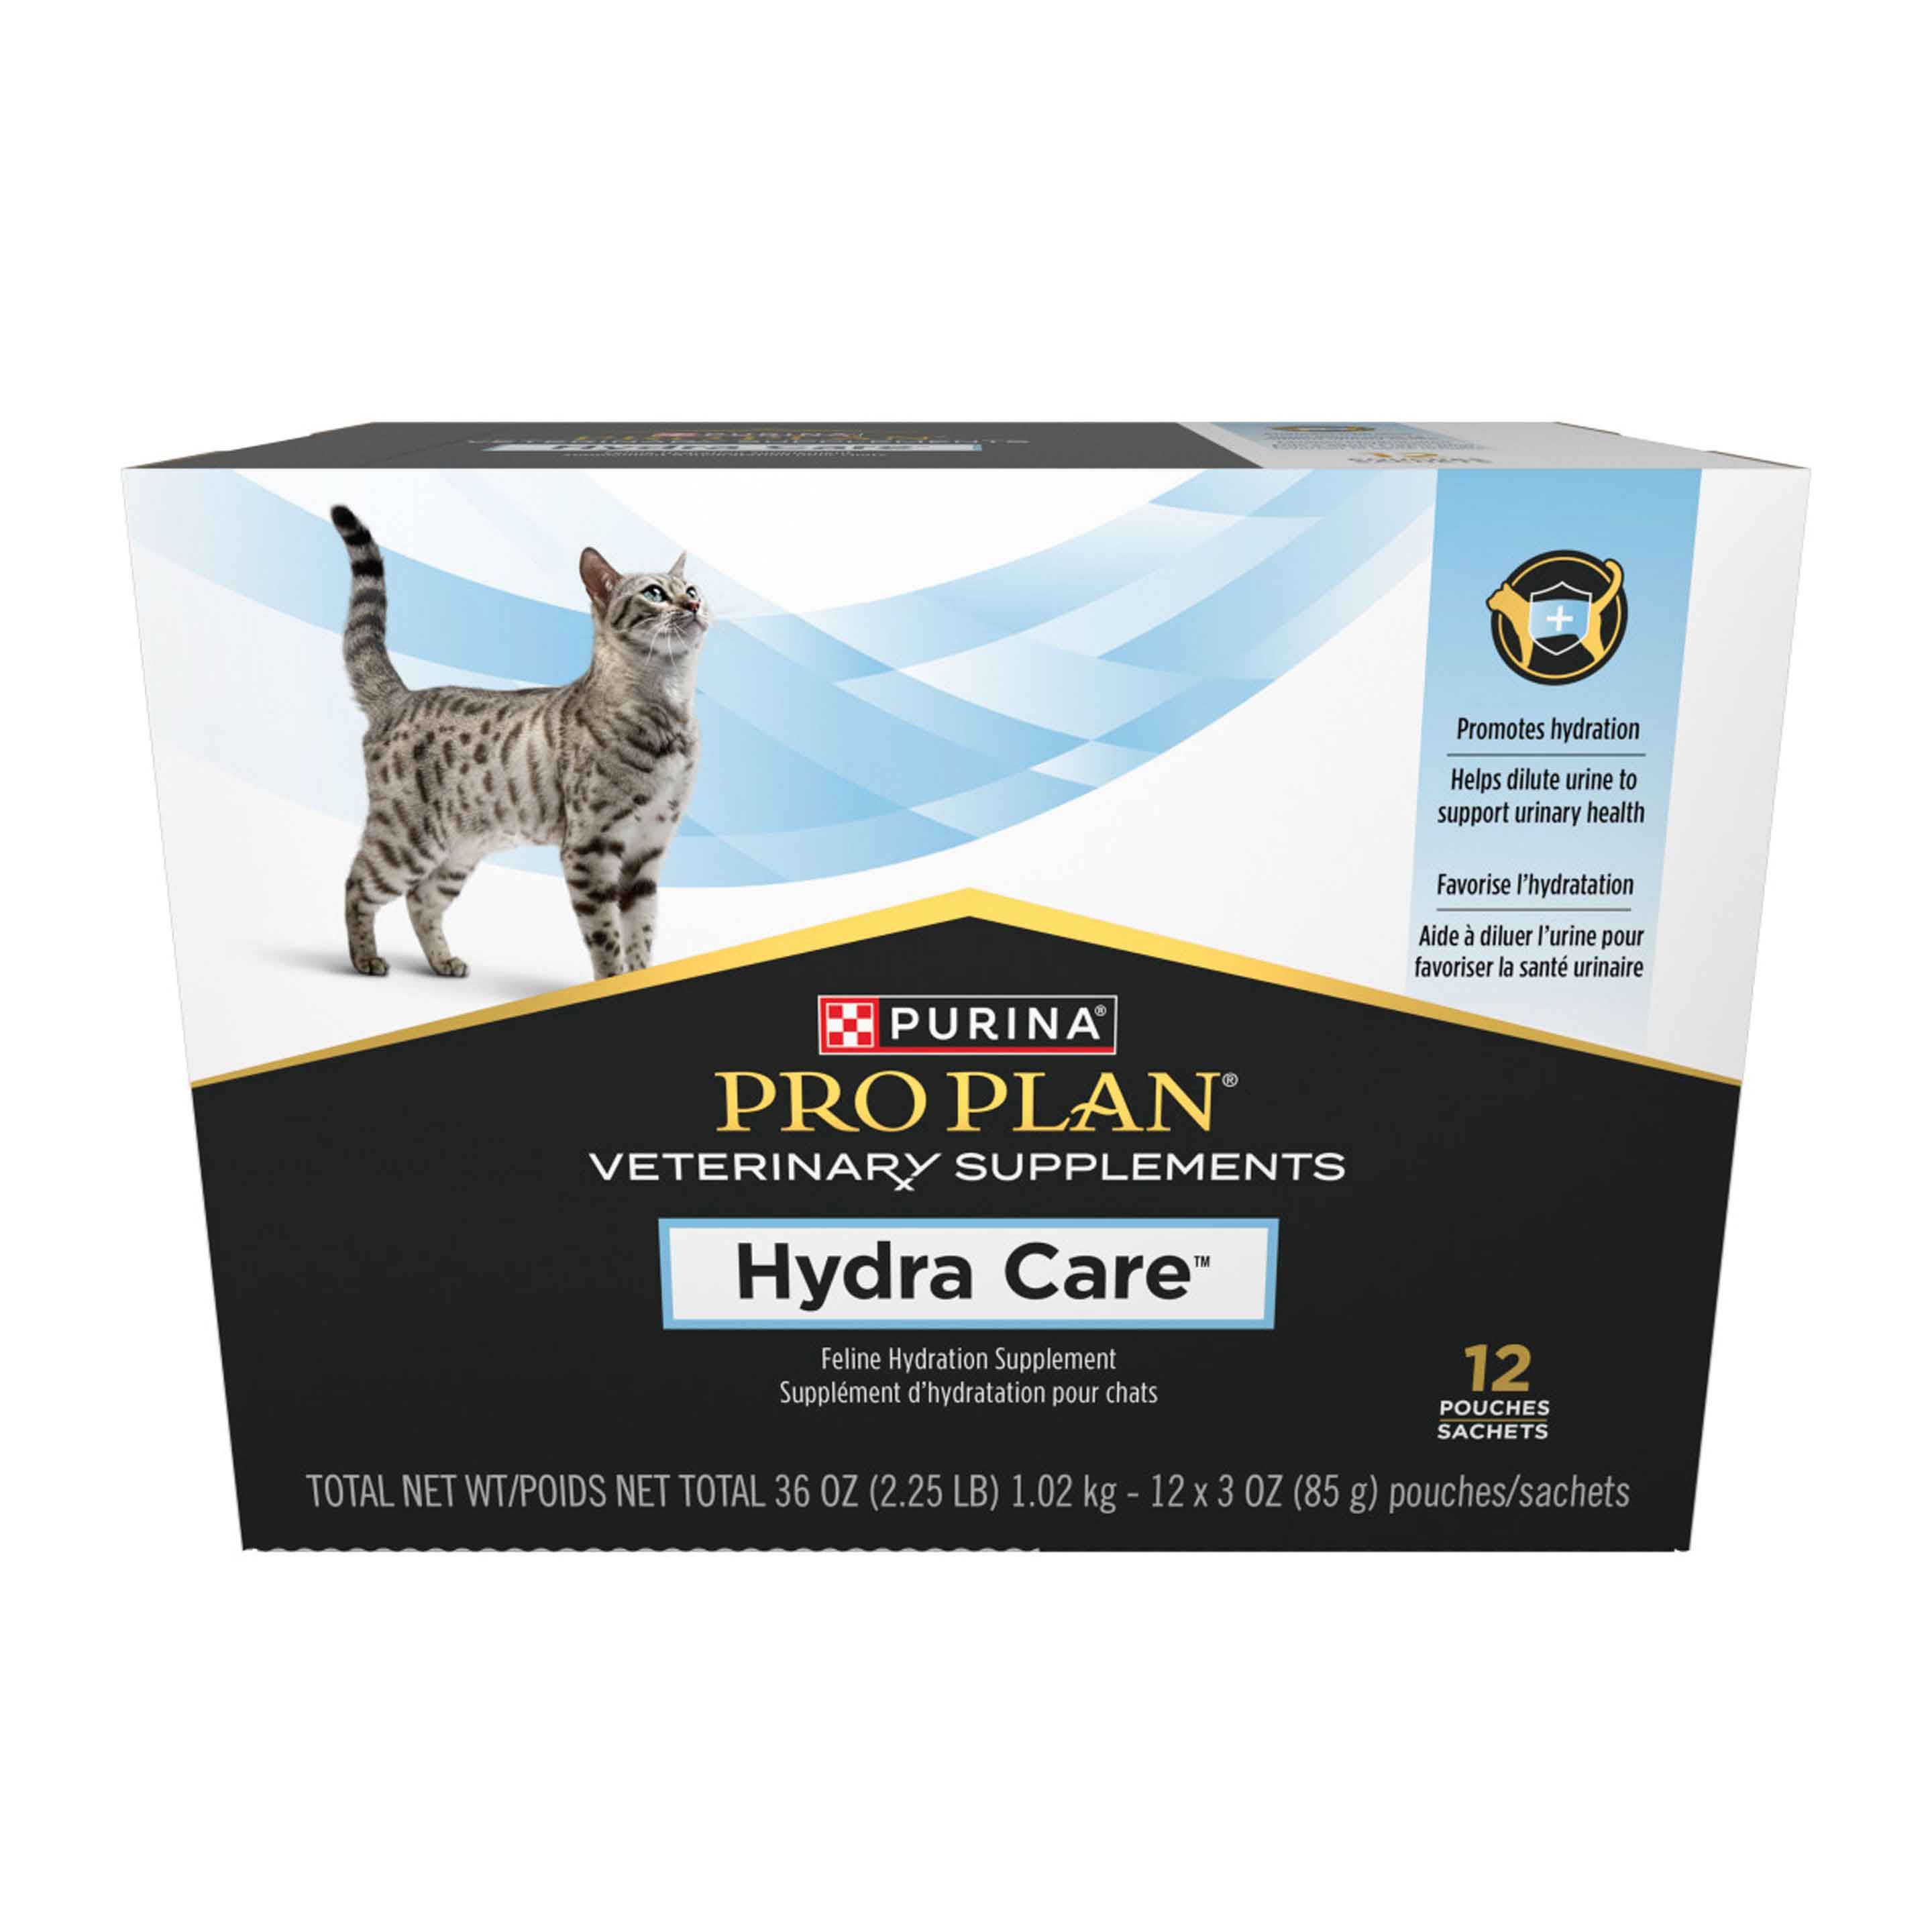 Purina Pro Plan Veterinary Supplements Hydra Care Cat Supplements - (12) 3 Ounce Pouches